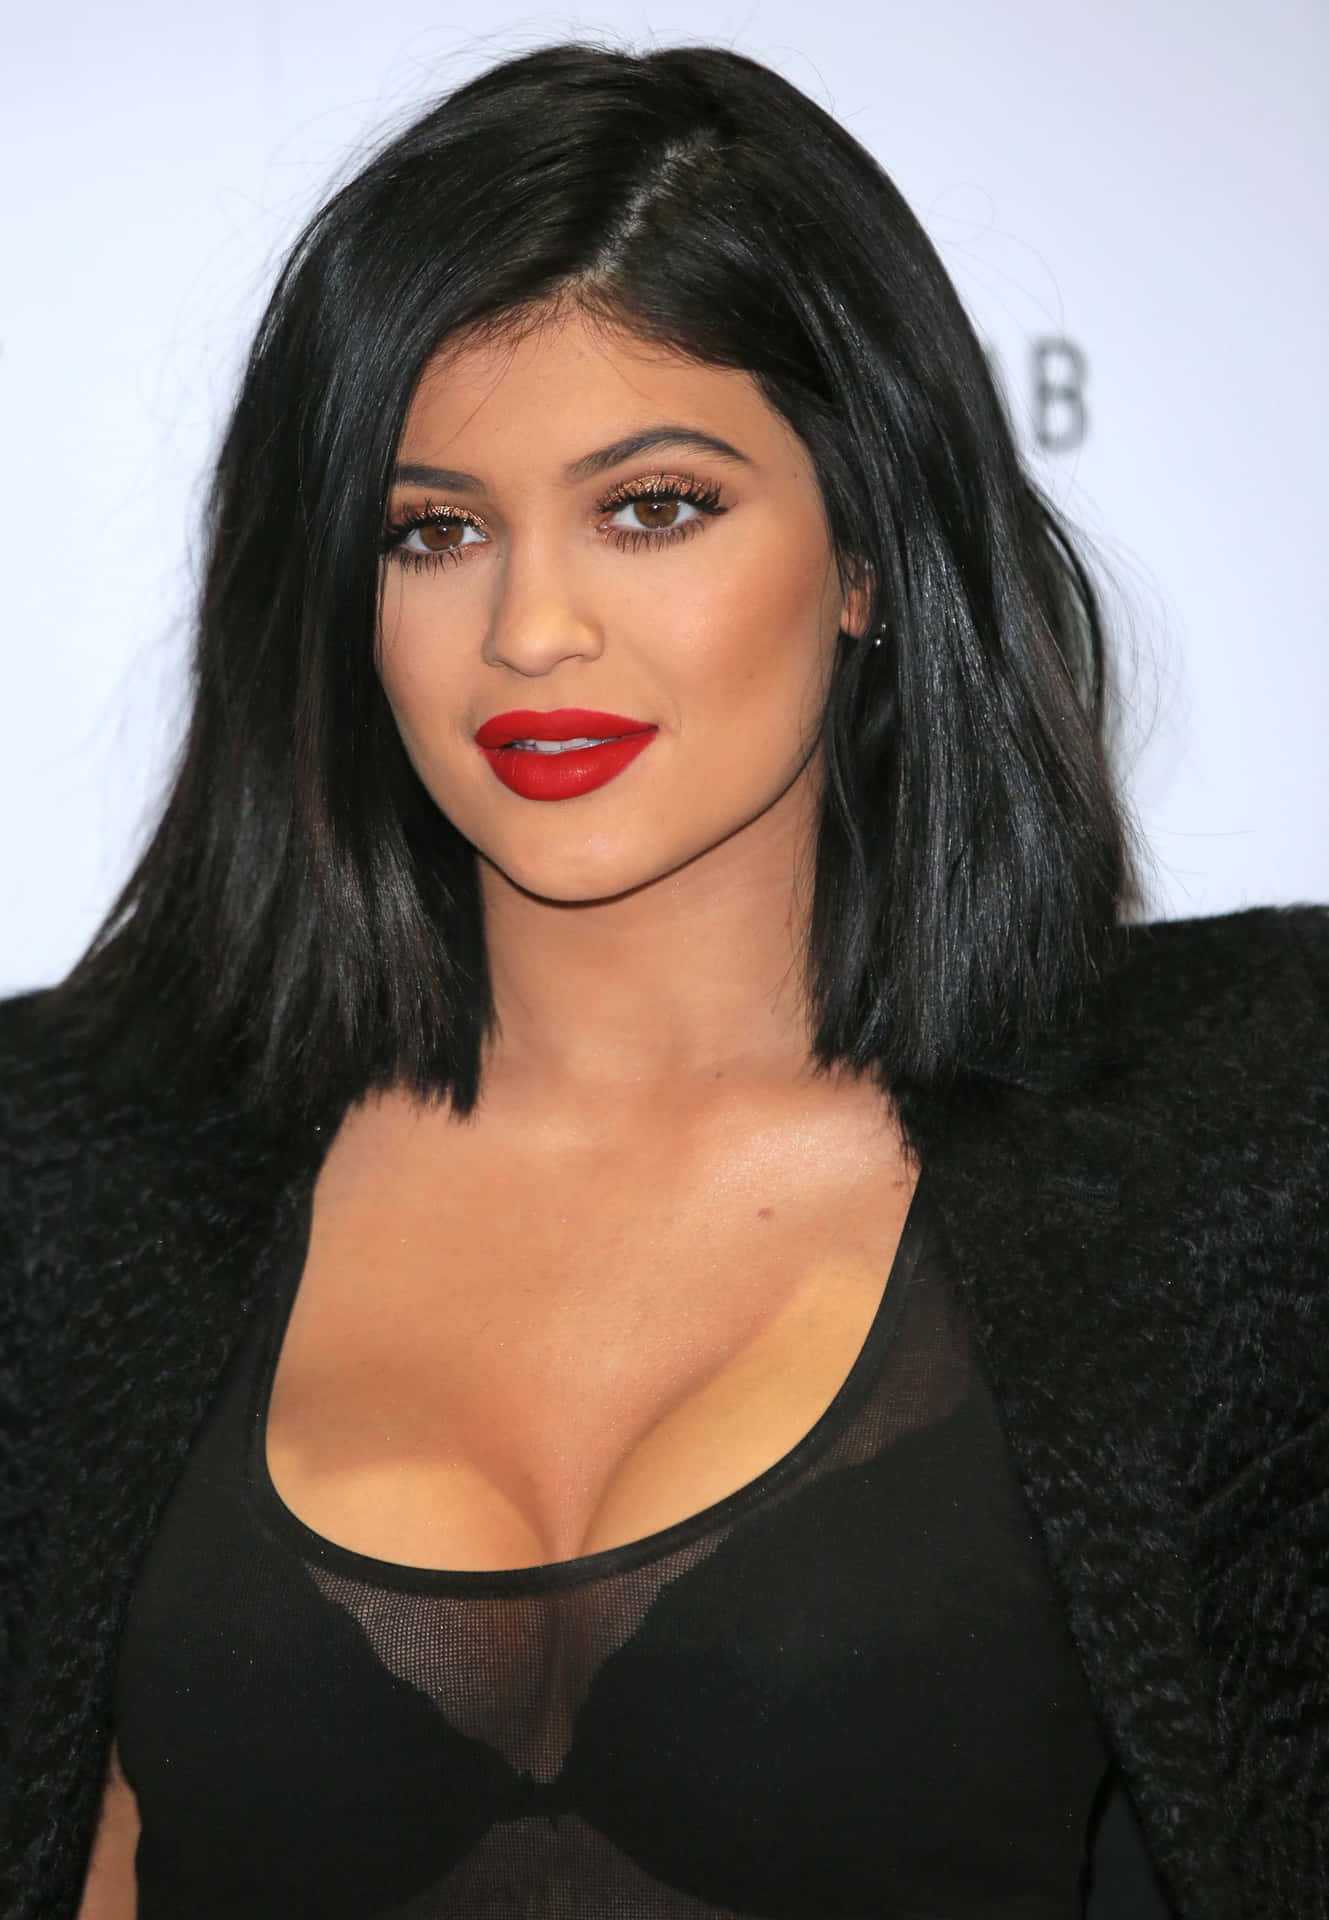 Imágenesde Kylie Jenner